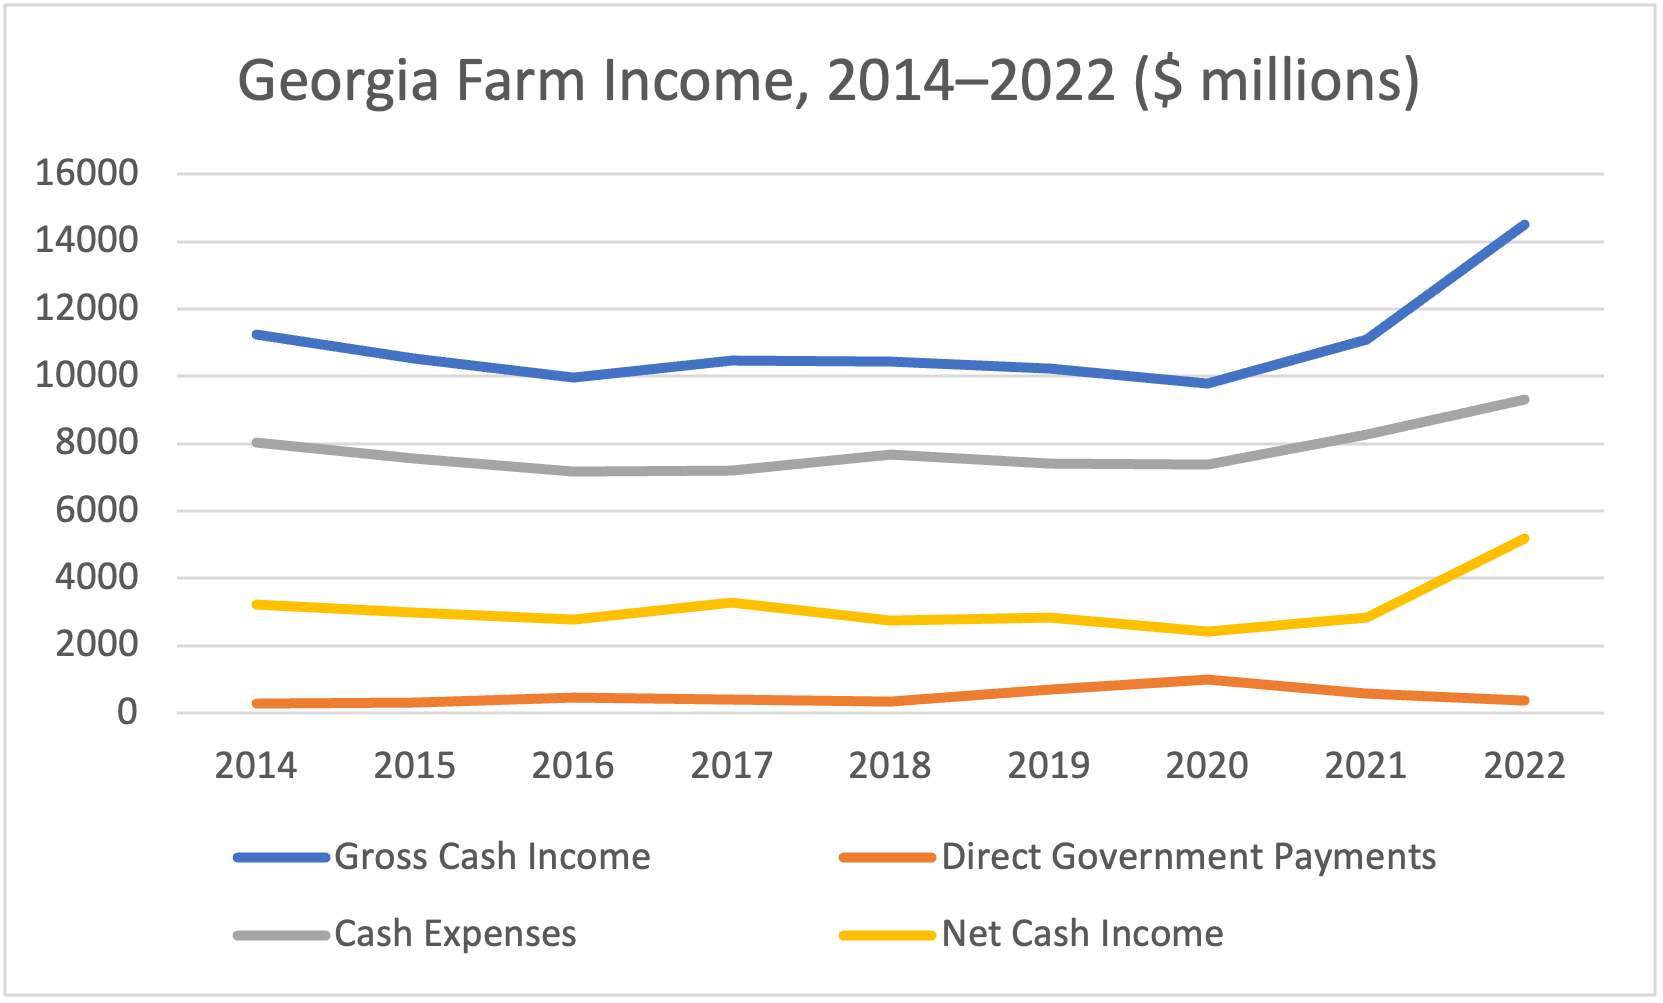 Georgia farm income between 2014 and 2022 show fairly level lines for gross cash income, net cash income, cash expenses and government payments. There was a slight decline from 2014 through 2016 and then the levels held steady until a decline in 2020 (except in gov't payments) and a slightly steeper incline in gross cash income, cash expenses and net cash income between 2020-2022. In that same period, there was a decline in government payments.